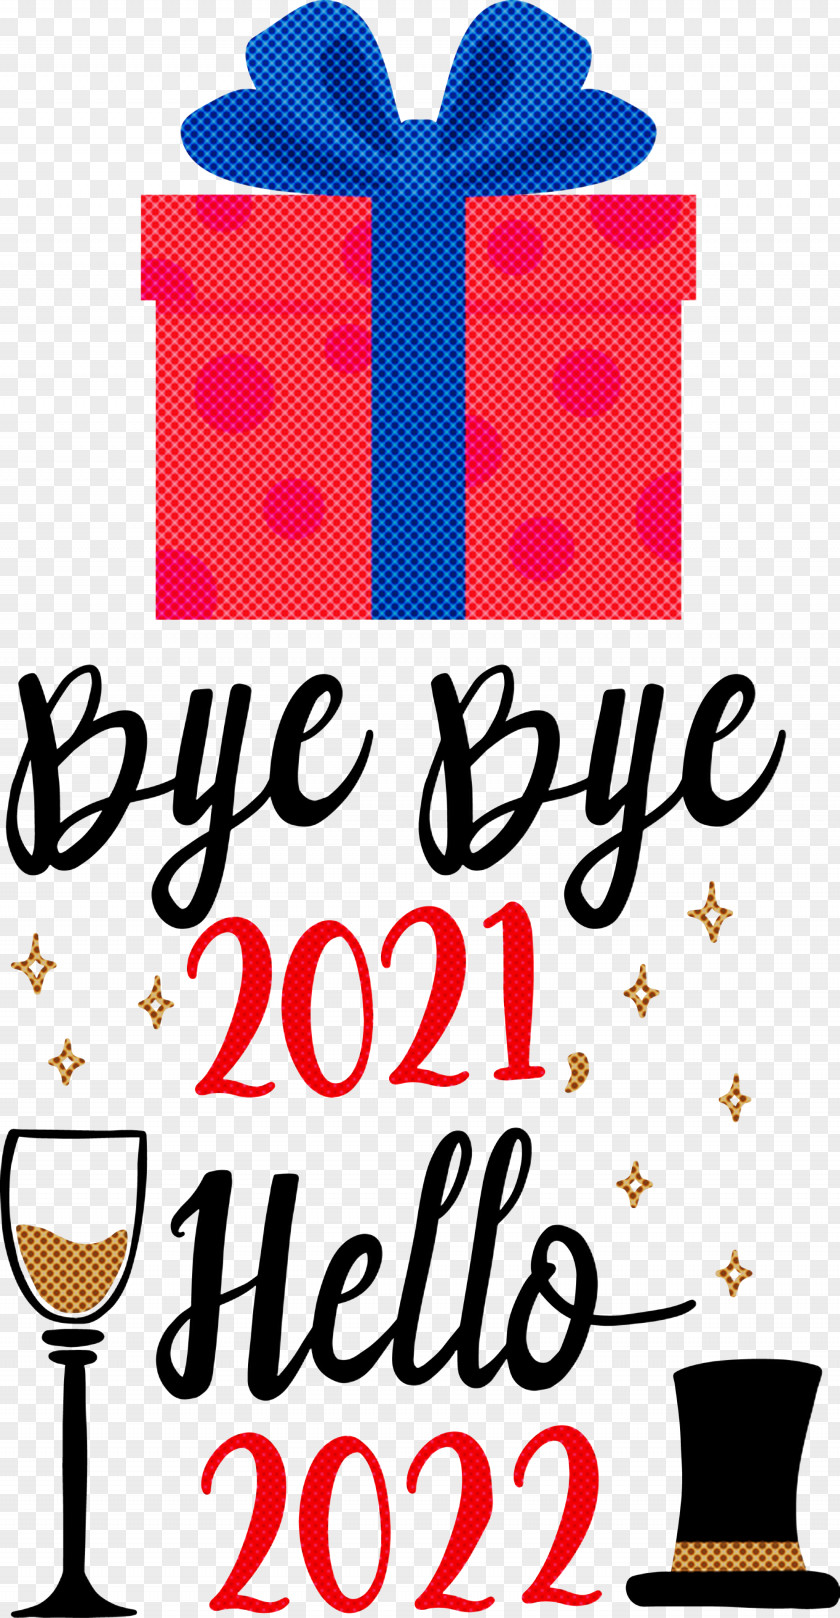 Hello 2022 New Year PNG